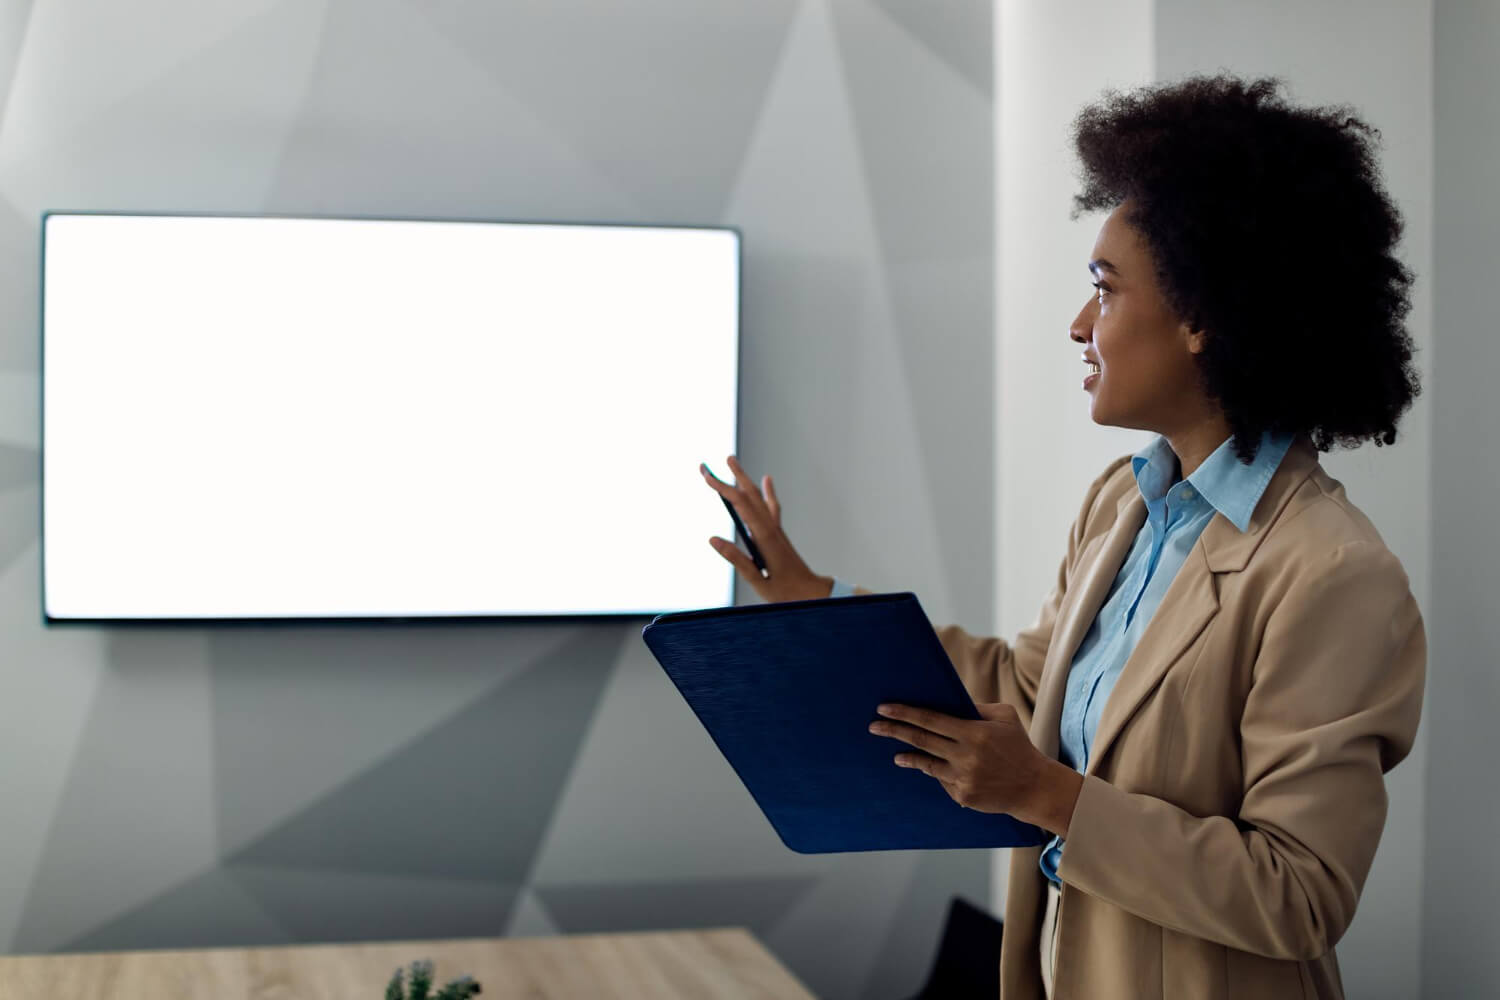 Business woman presenting with projection screen in an office